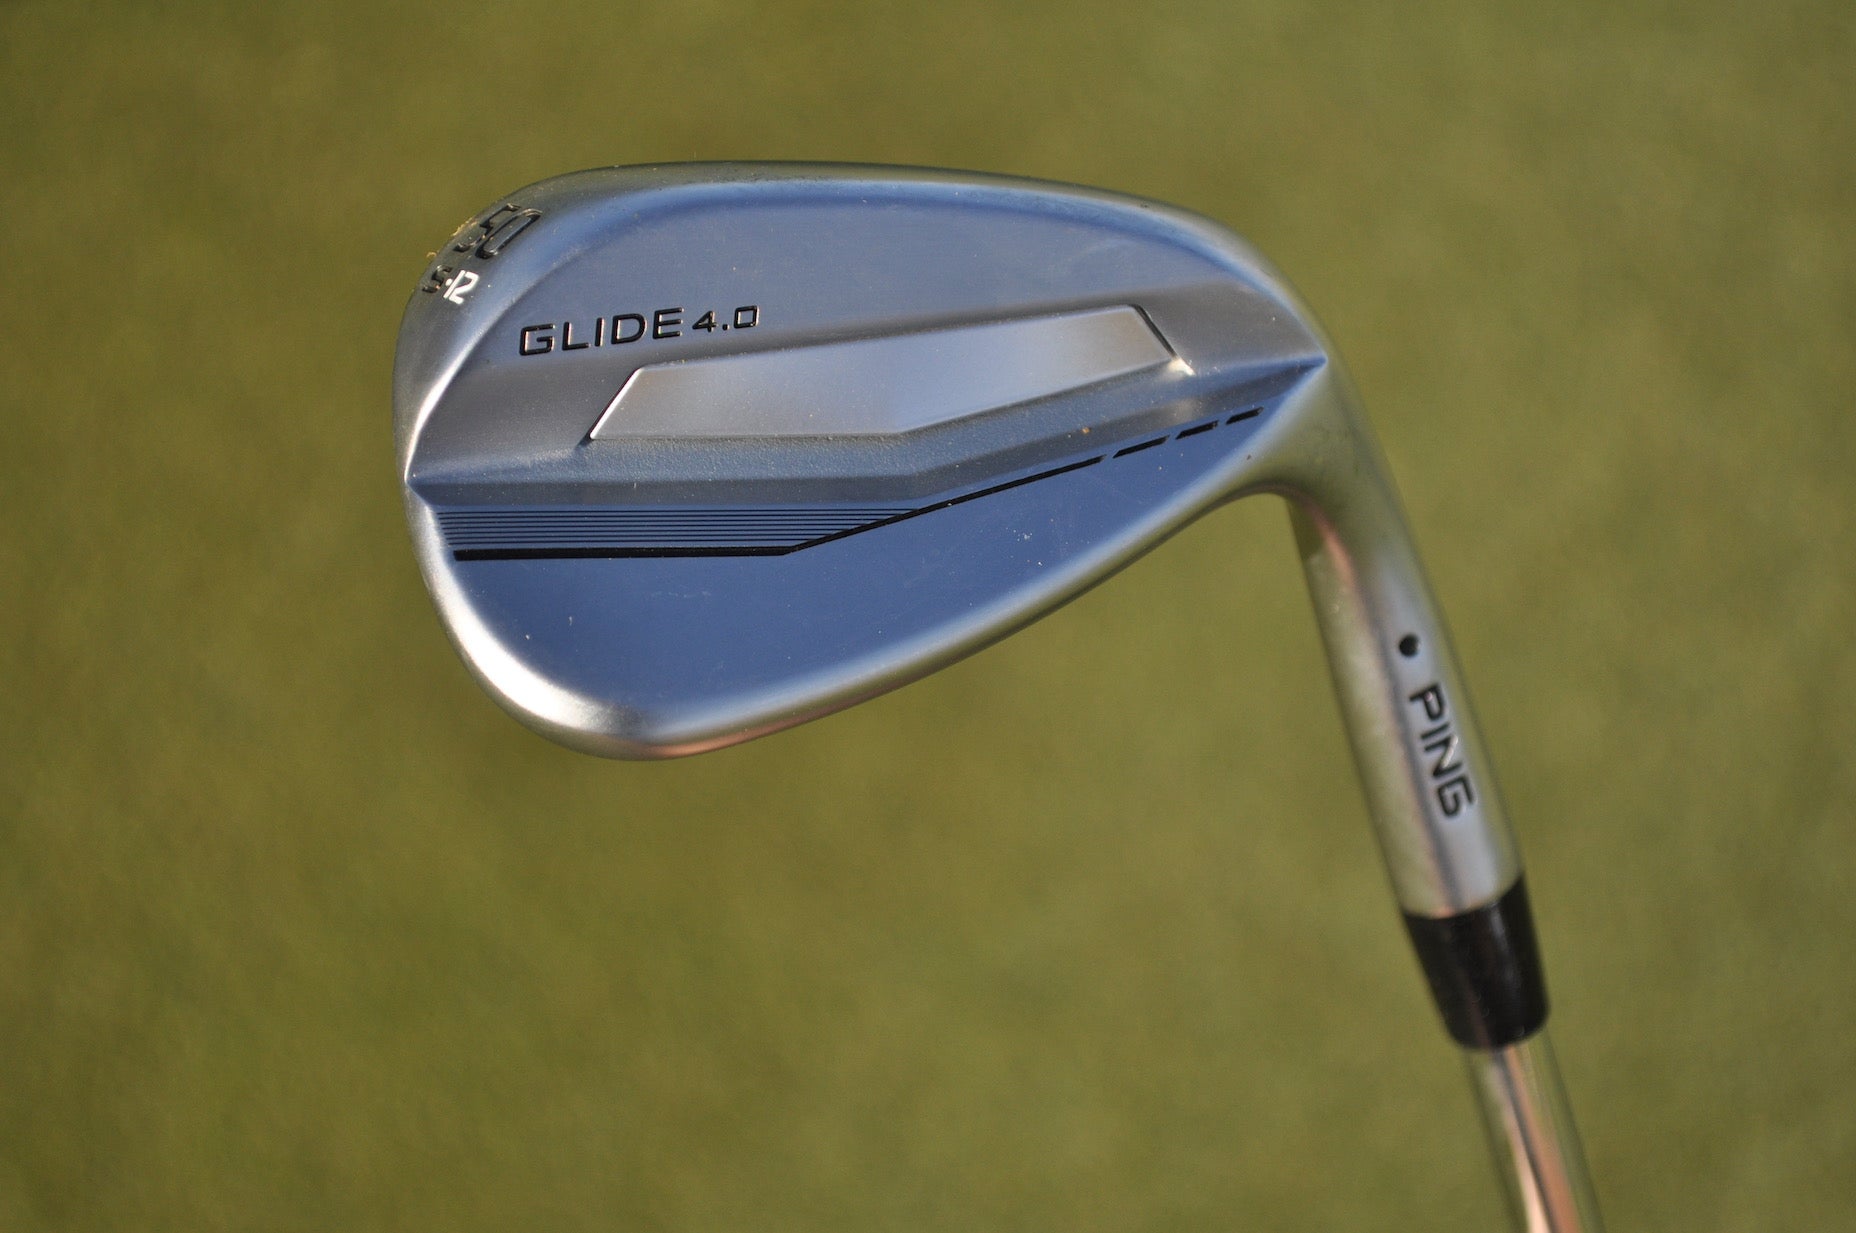 Ping's Glide 4.0 wedge delivers lower launch, more spin